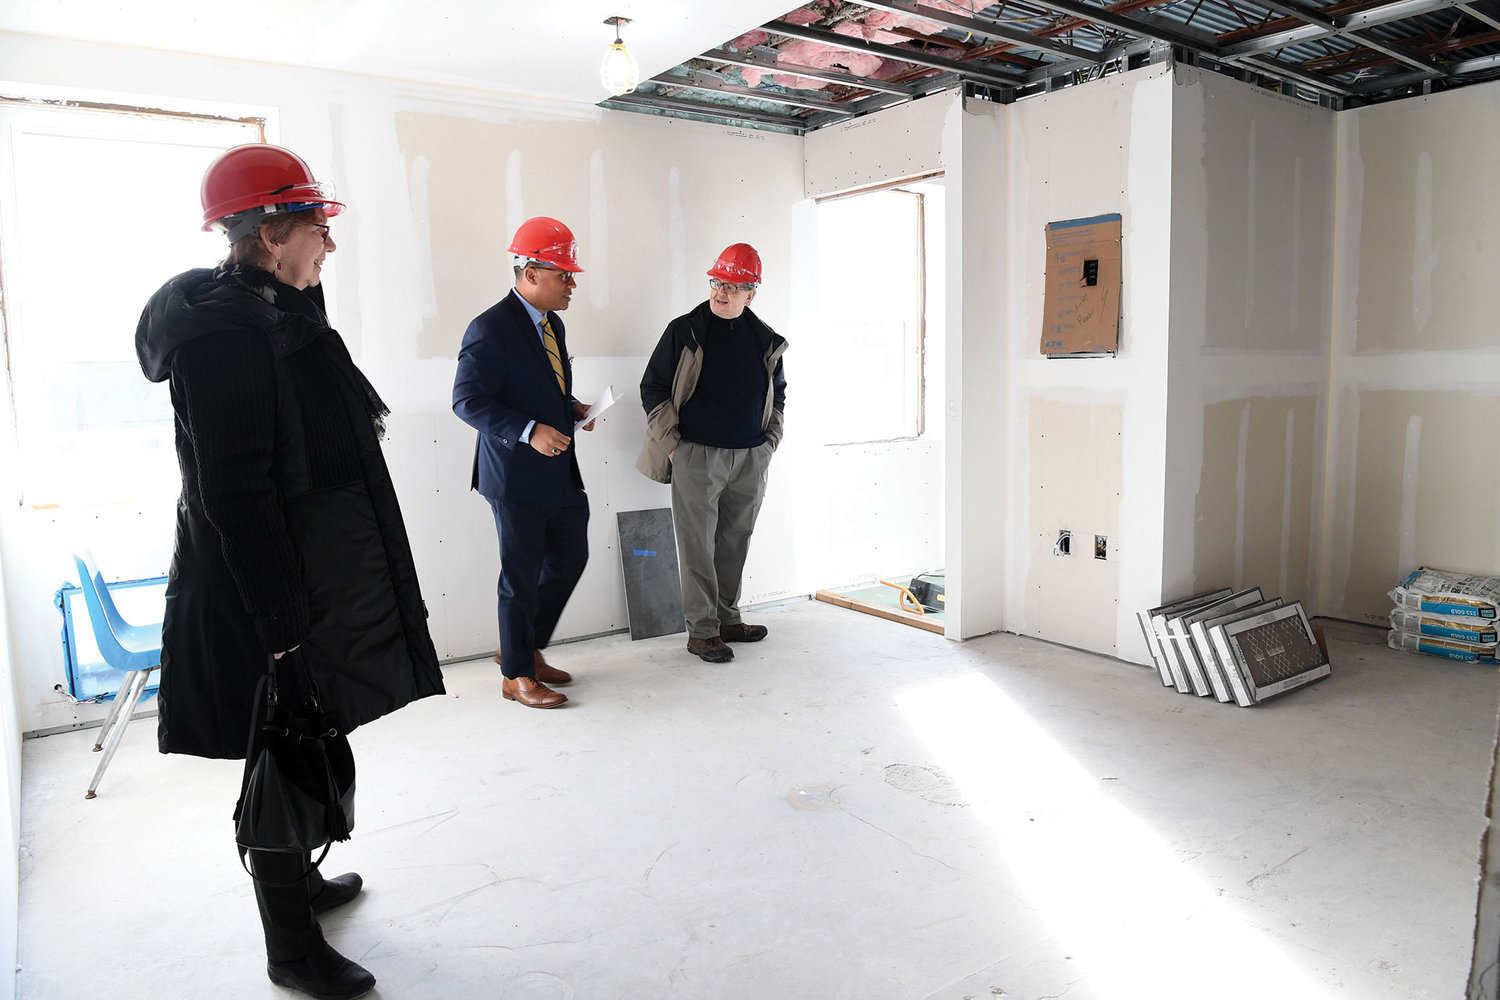 Hugo Pizarro, a senior vice president and chief experience officer for ArchCare, center, shows Pat and Thomas Alberto the construction progress on ArchCare’s $3 million project to provide independent housing for young adults with autism at St. Teresa parish on Staten Island Jan. 17.